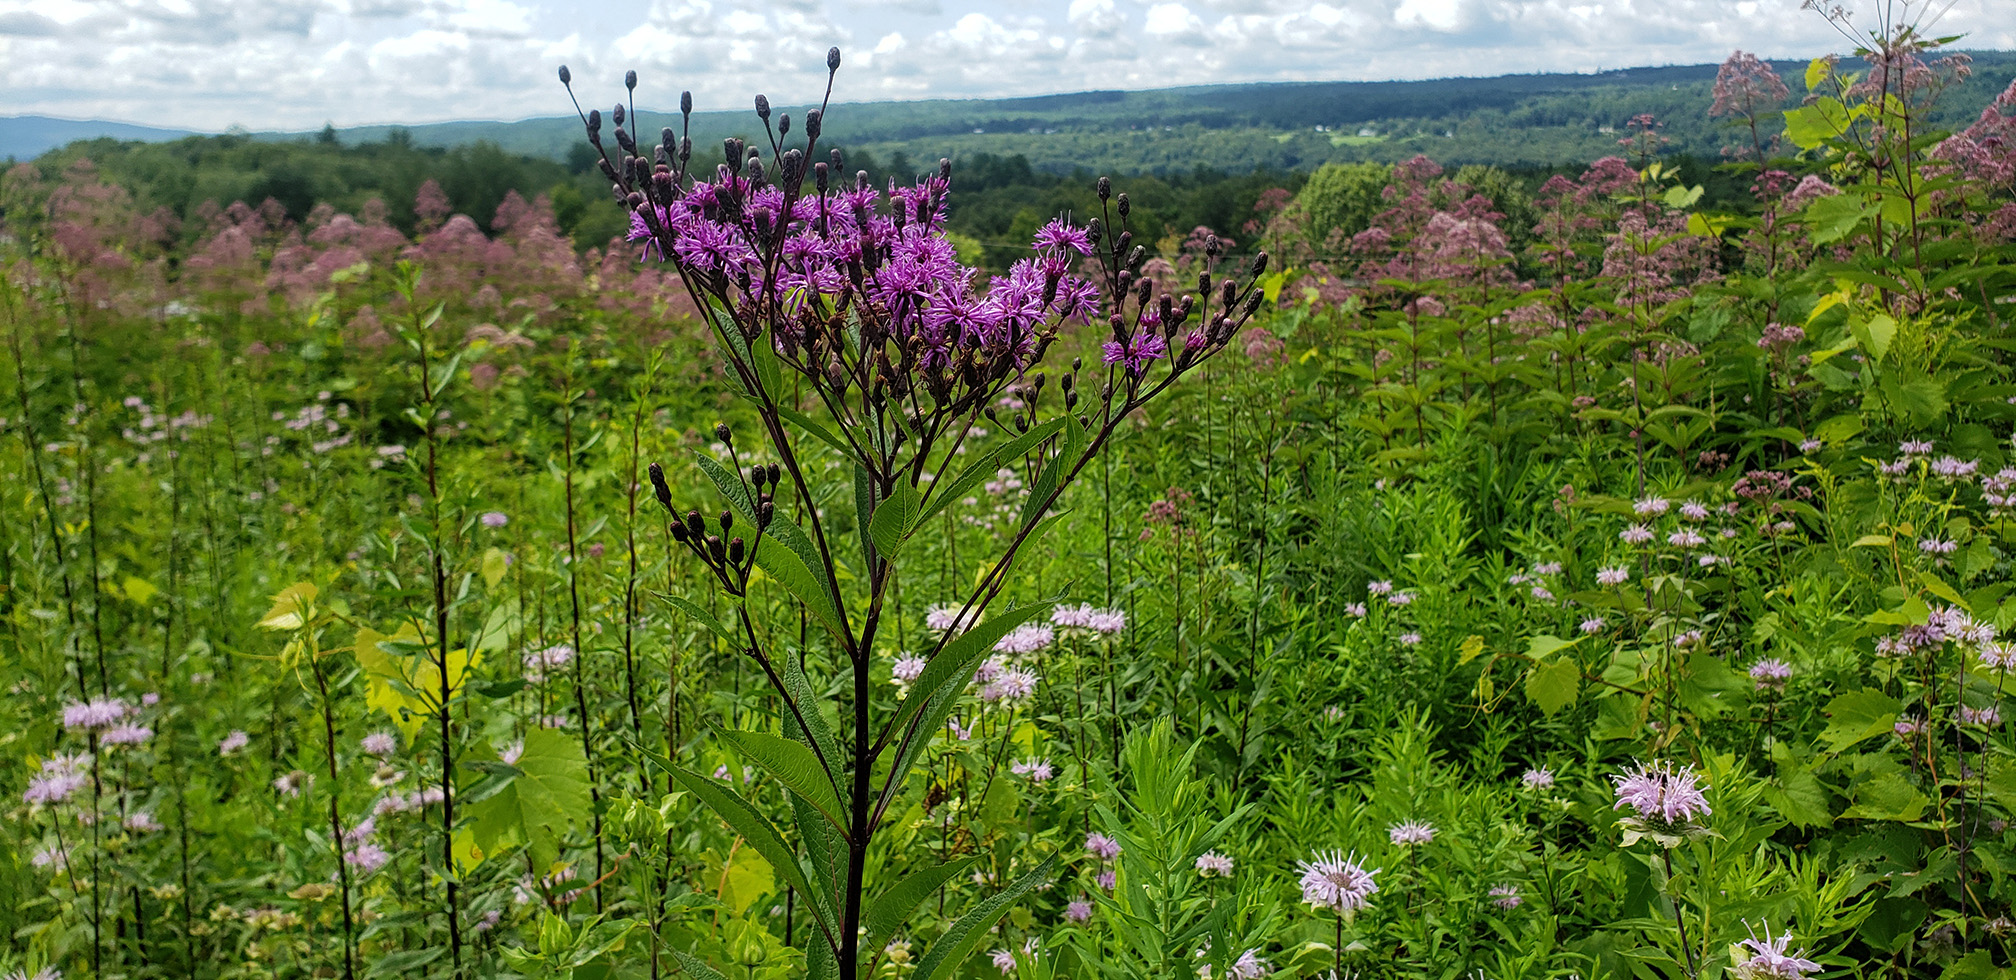 This photograph shows a flowering meadow on the edge of an orchard. The flowers include tall dark-purple flowers, lower growing pale-purple flowers, and darker pink blooms beyond. In the distance can be seen green forest covering gently sloping hills. The sky has white and pale gray clouds.